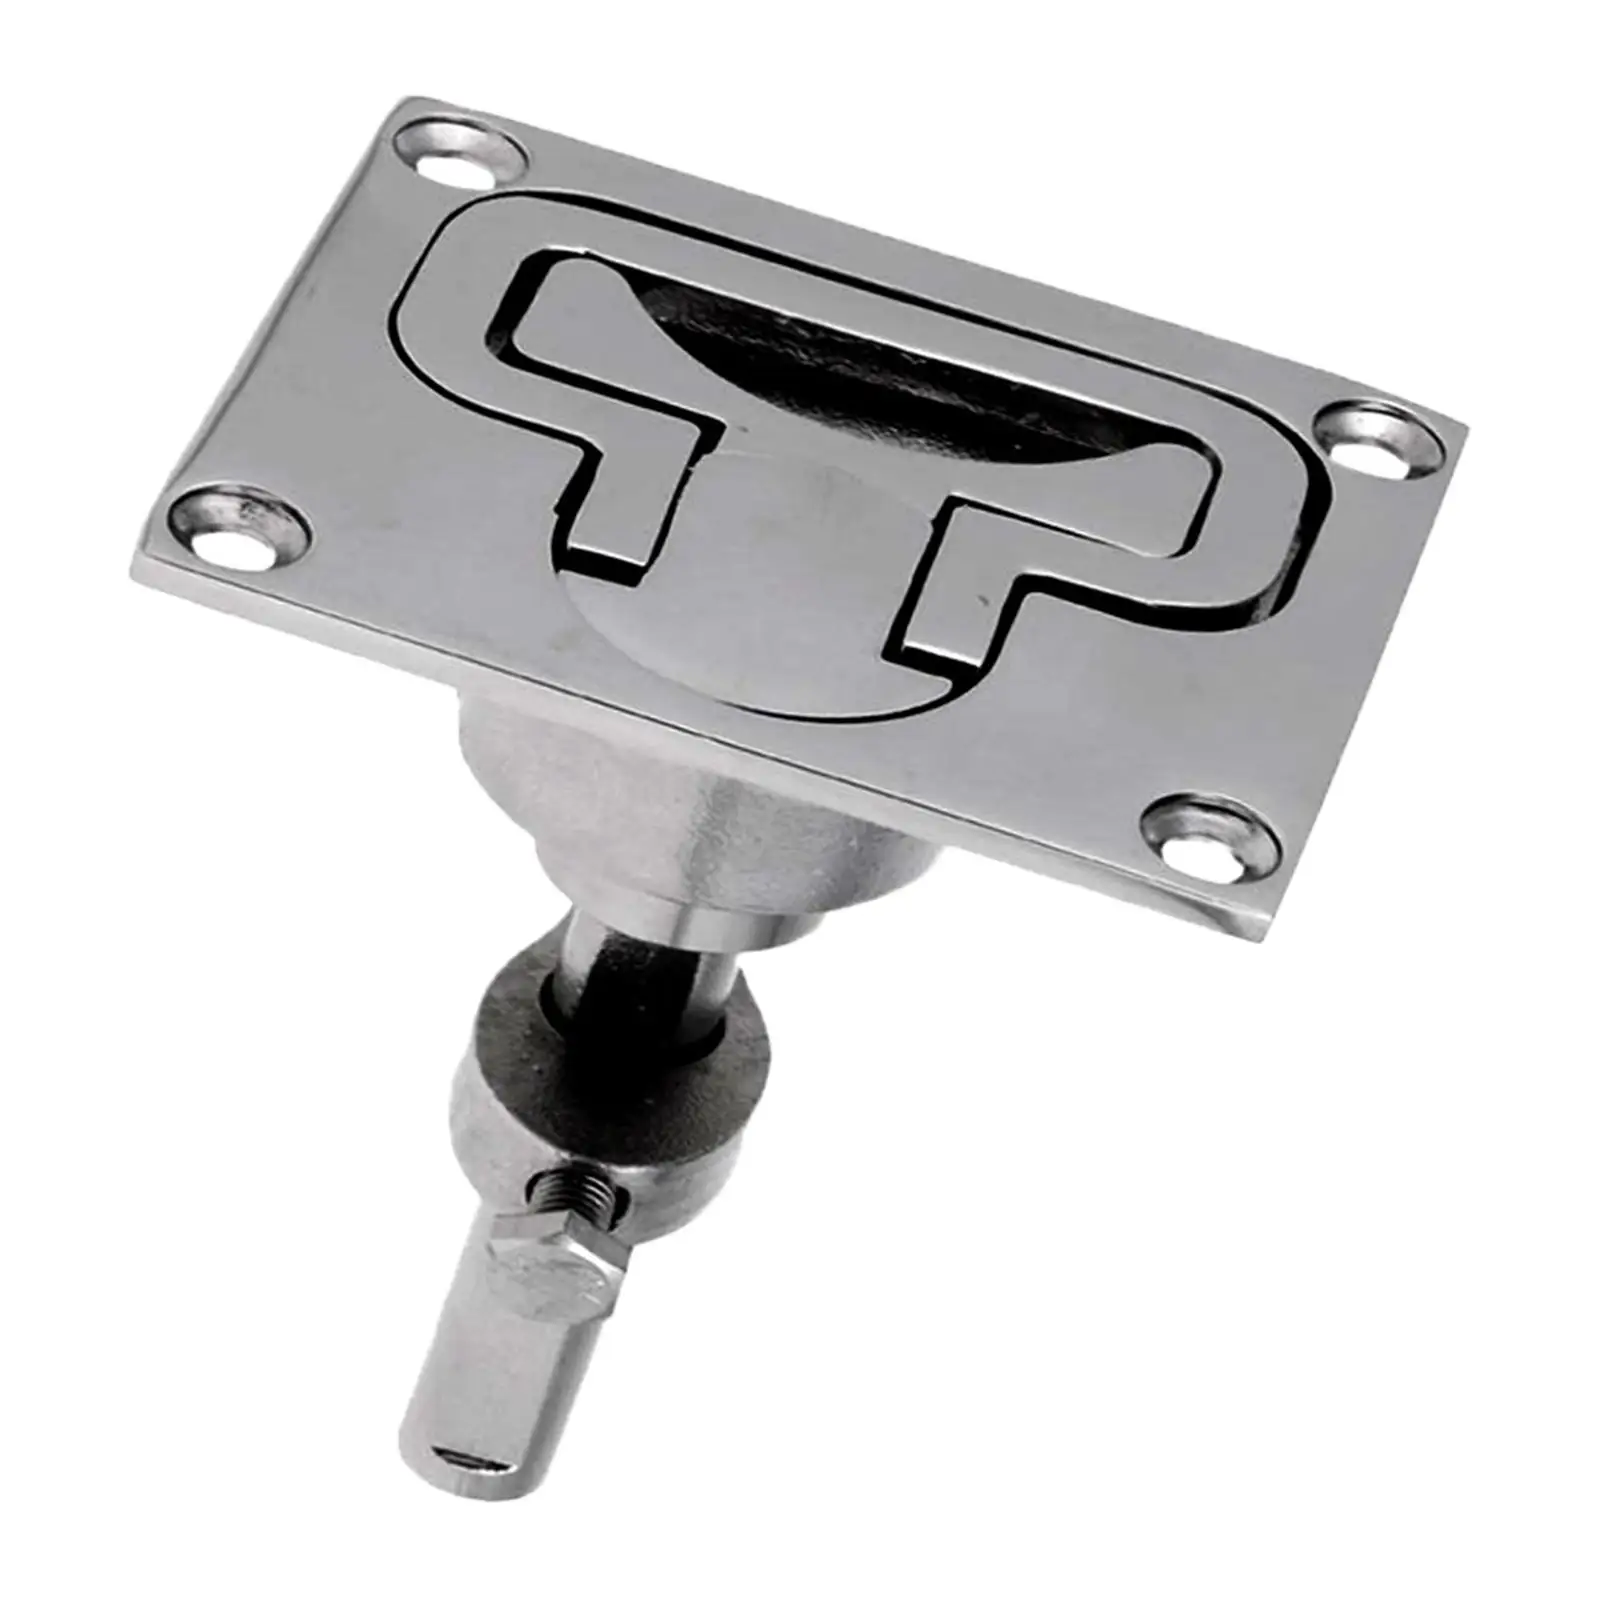 Stainless Steel Boat Floor Buckle Hatch Latch Replaces Polishing Flush Turning Lift Handle Easier to Install Boat Accessories